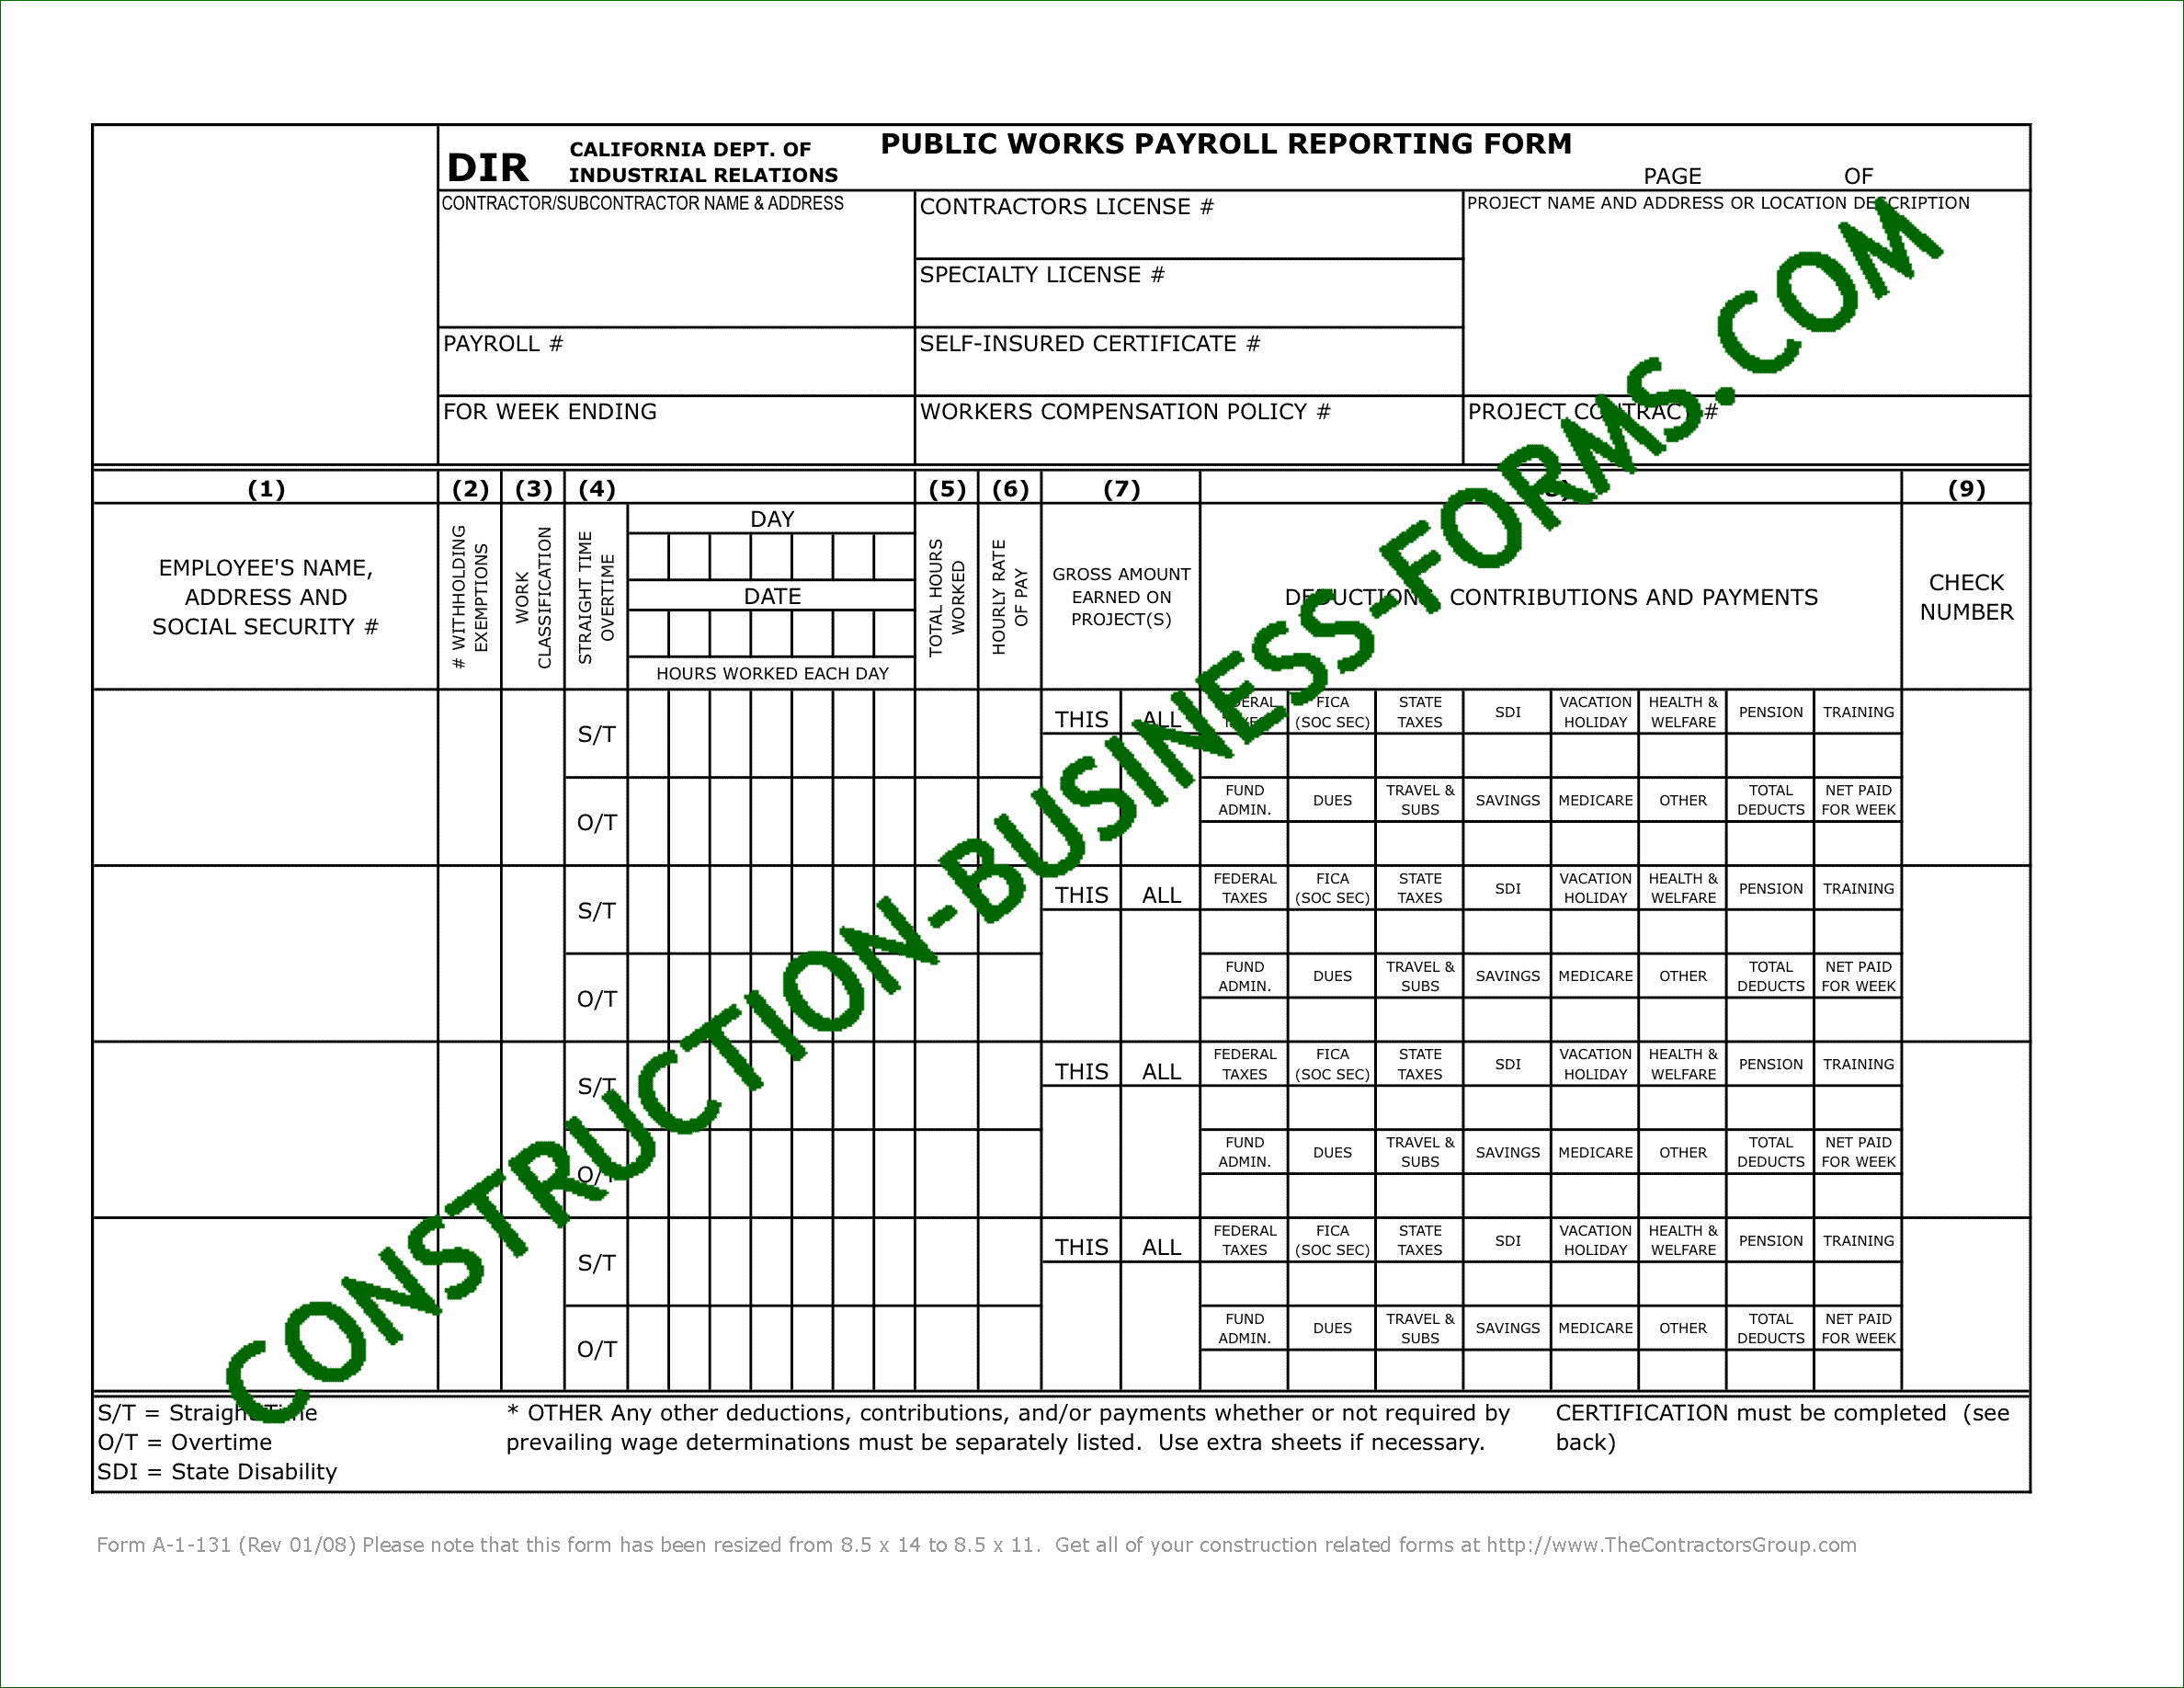 Image of the A-1-131 California Public Works Payroll Reporting Form with Autofill Fields available at www.Construction-Business-Forms.com